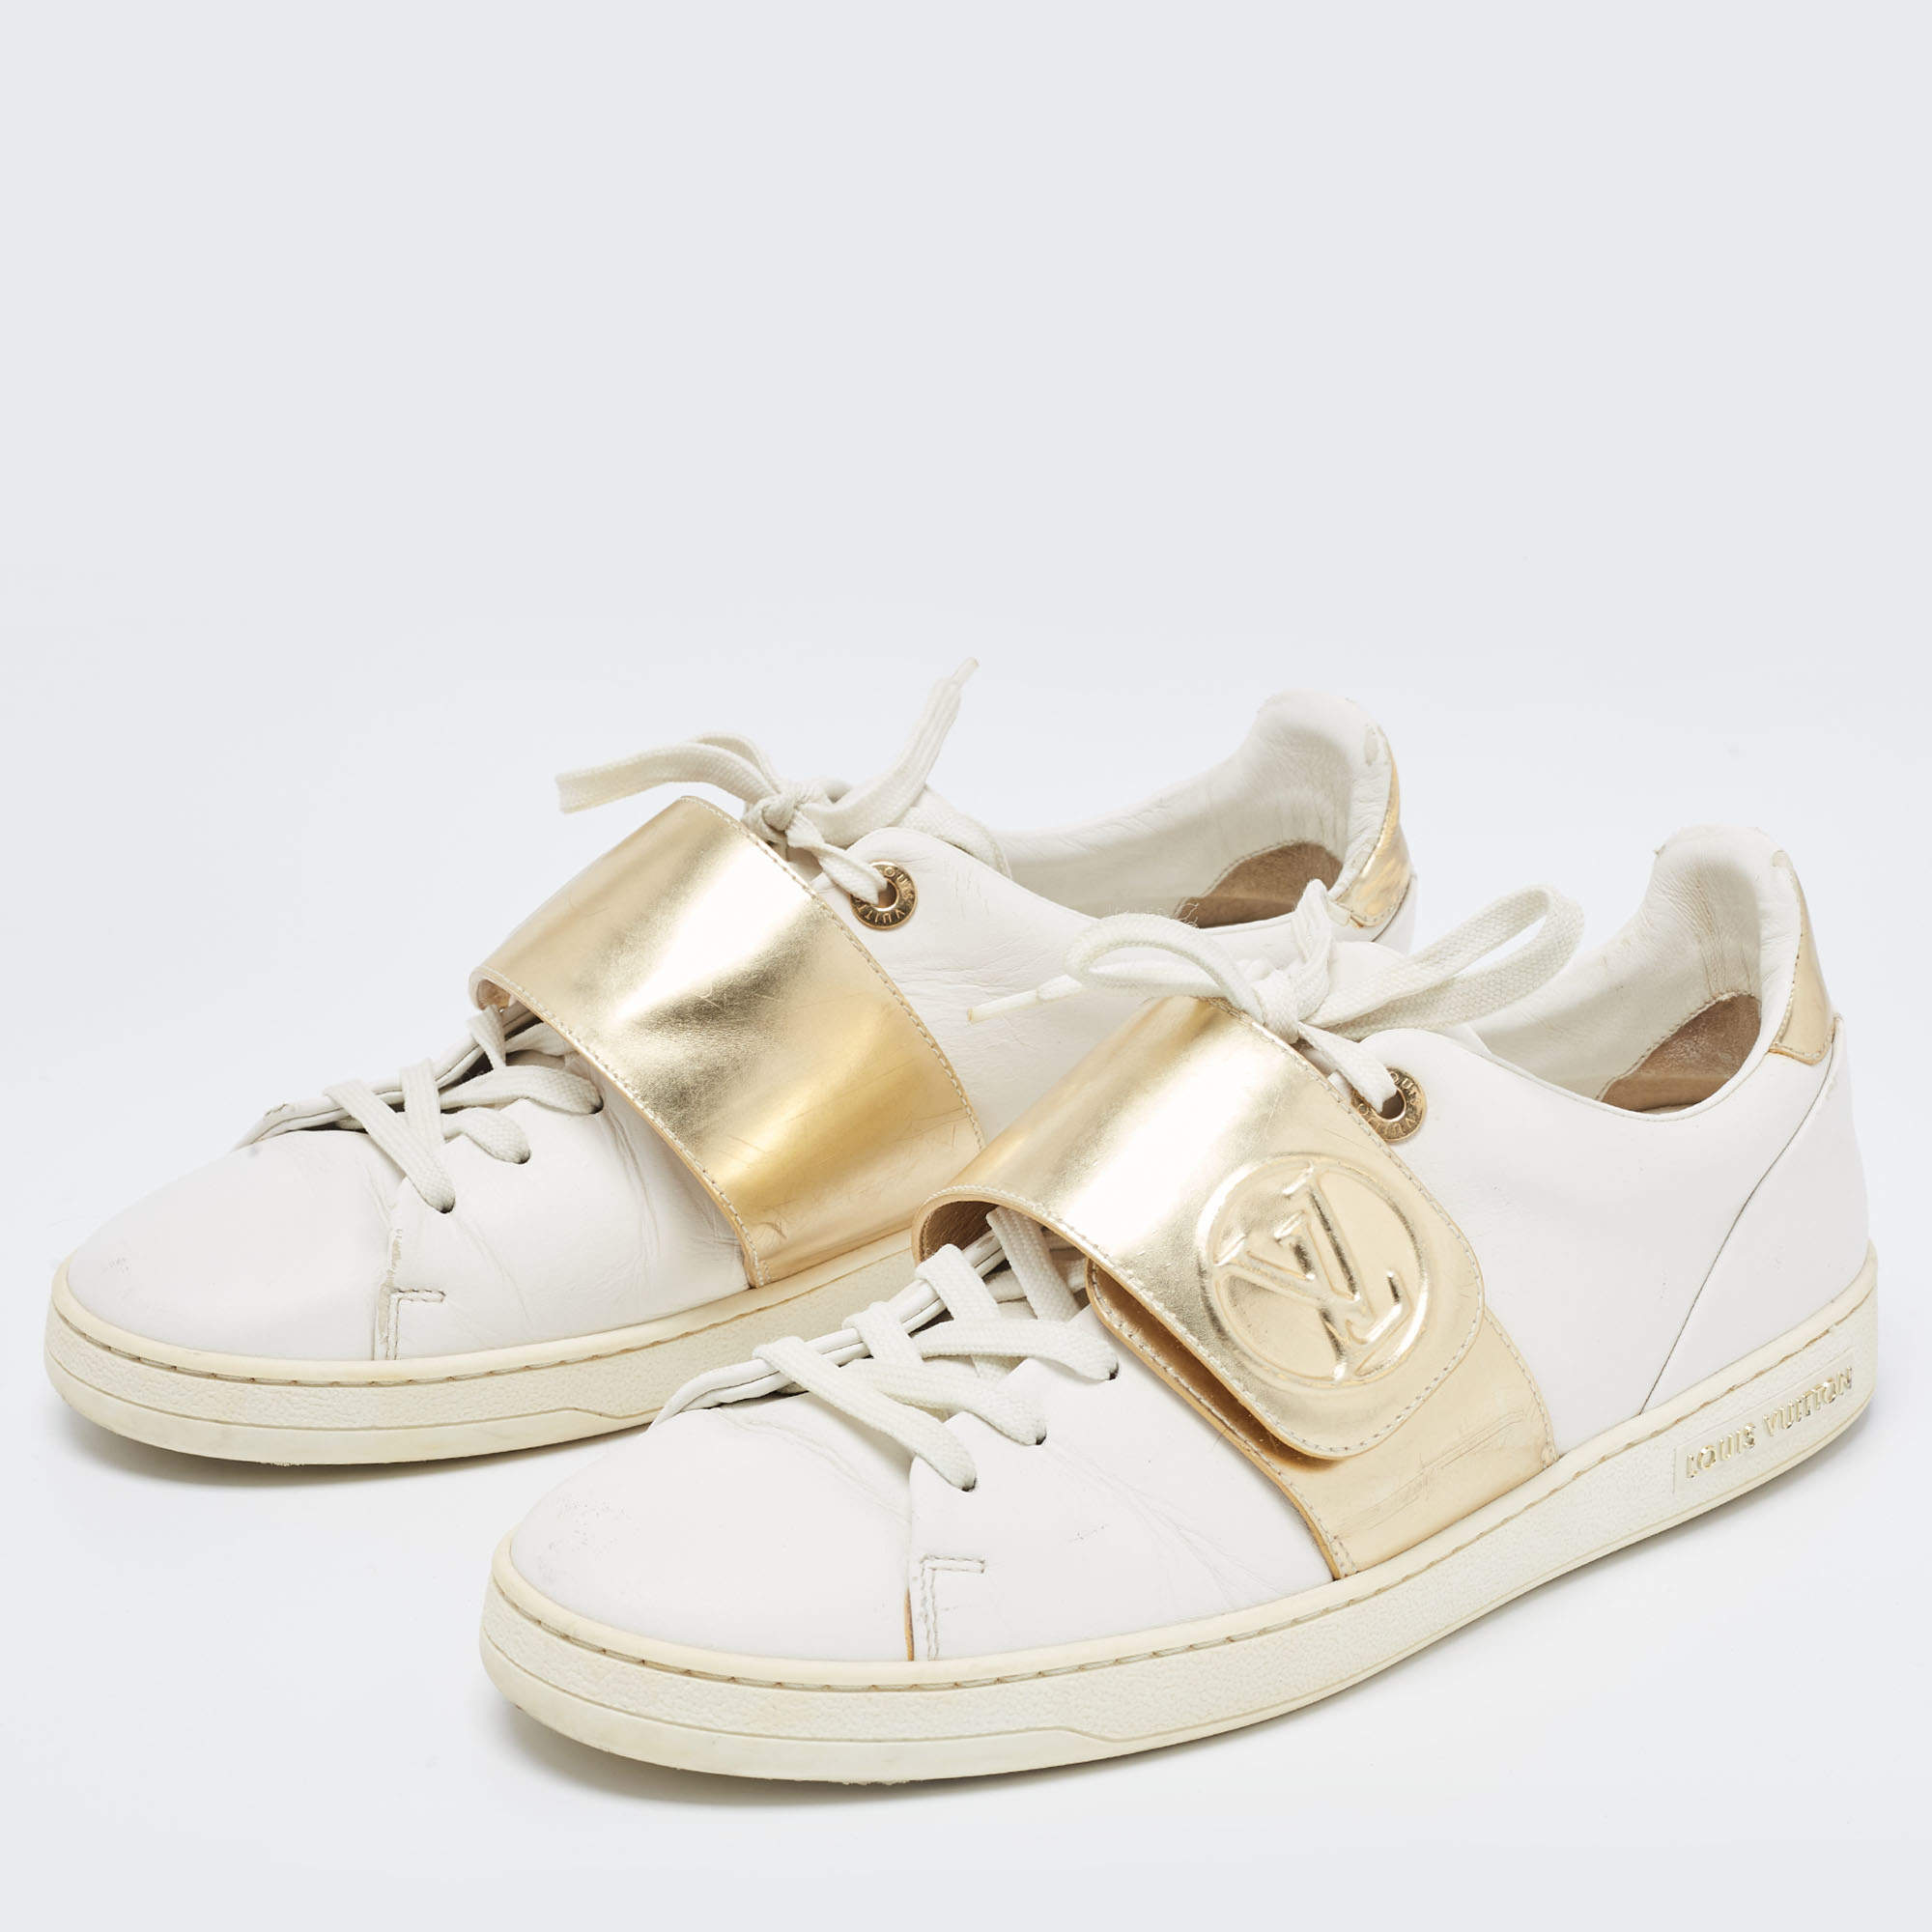 Louis Vuitton White/Brown Monogram Canvas and Leather Studded Frontrow  Sneakers Size 38 Louis Vuitton